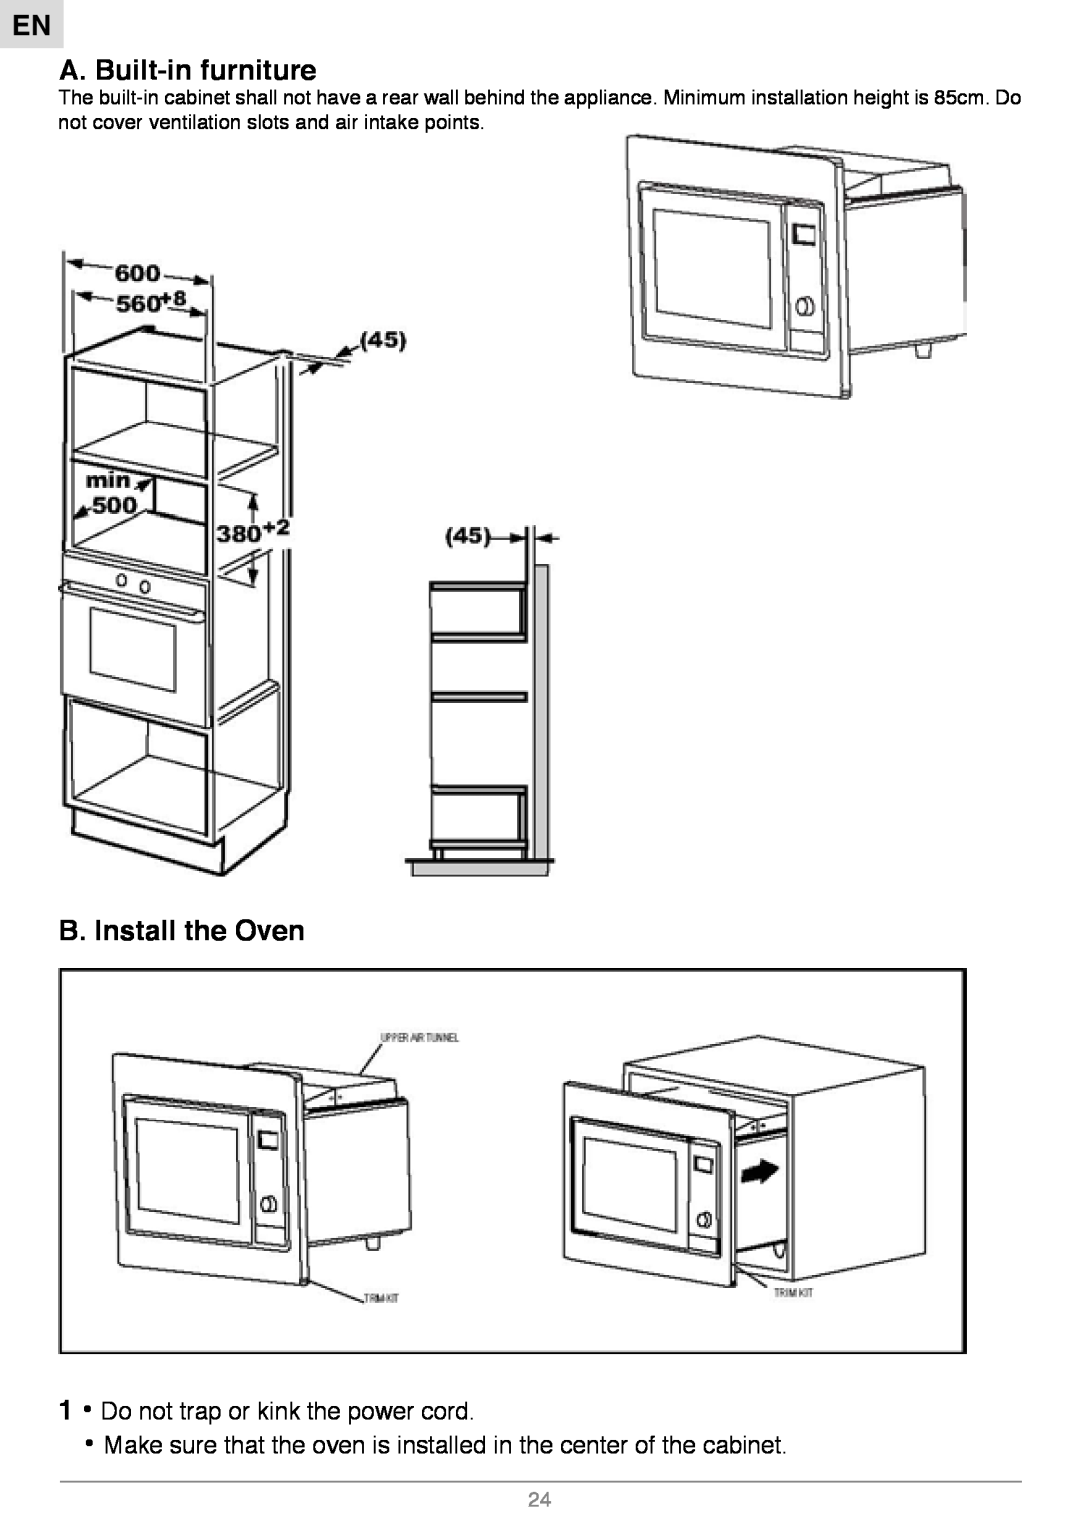 Foster S1000 manual A. Built-in furniture, B. Install the Oven, Do not trap or kink the power cord 